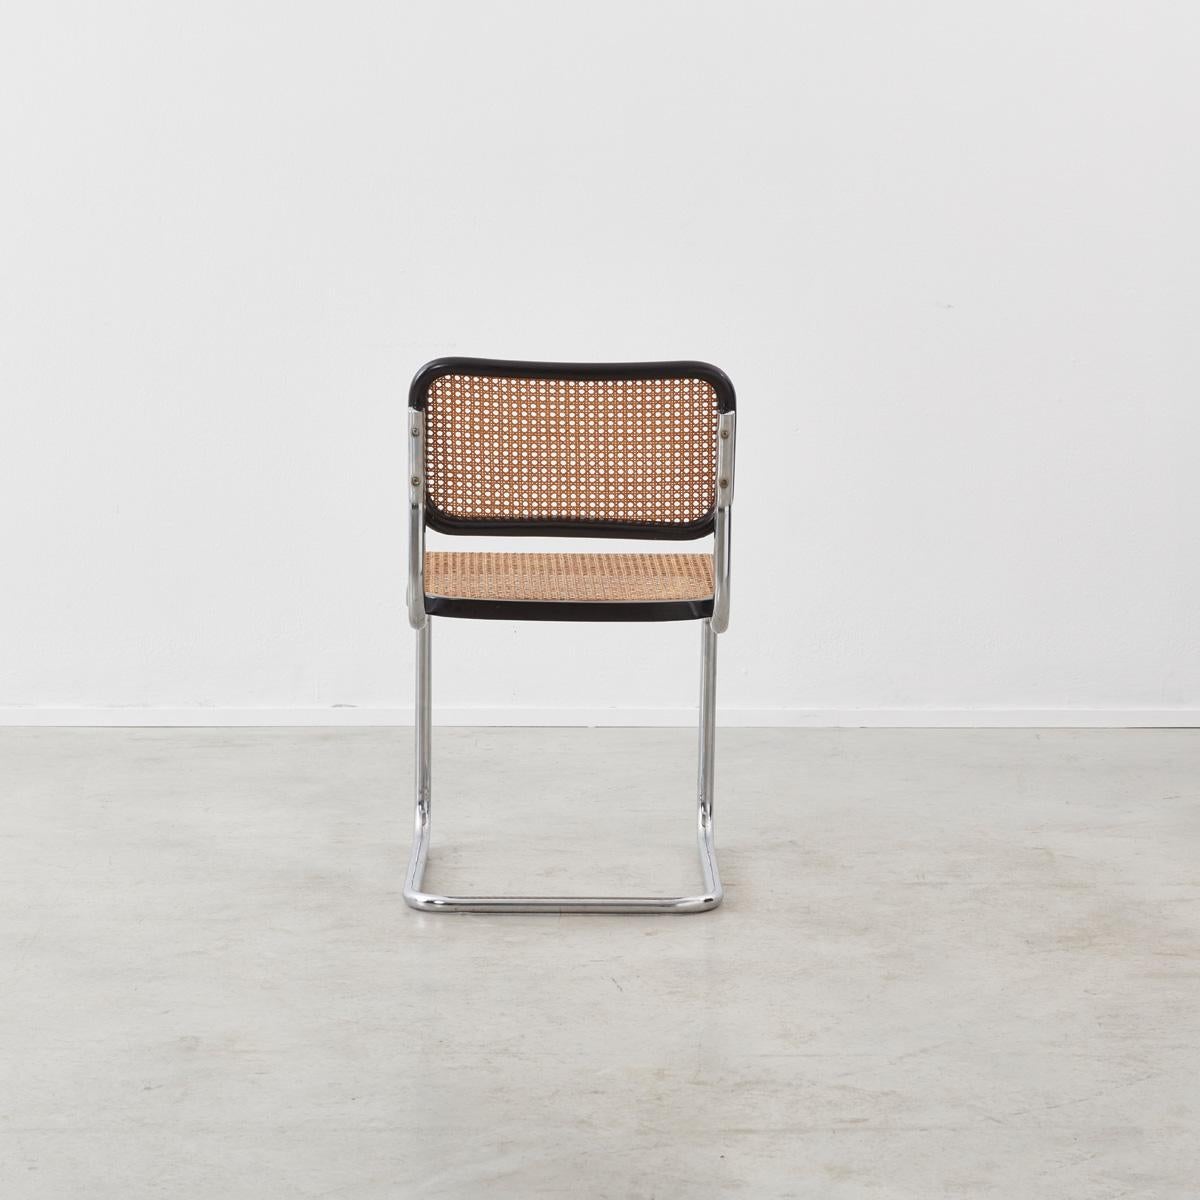 Cane Marcel Breuer Attributed Cesca Chair, Italy, circa 1970s